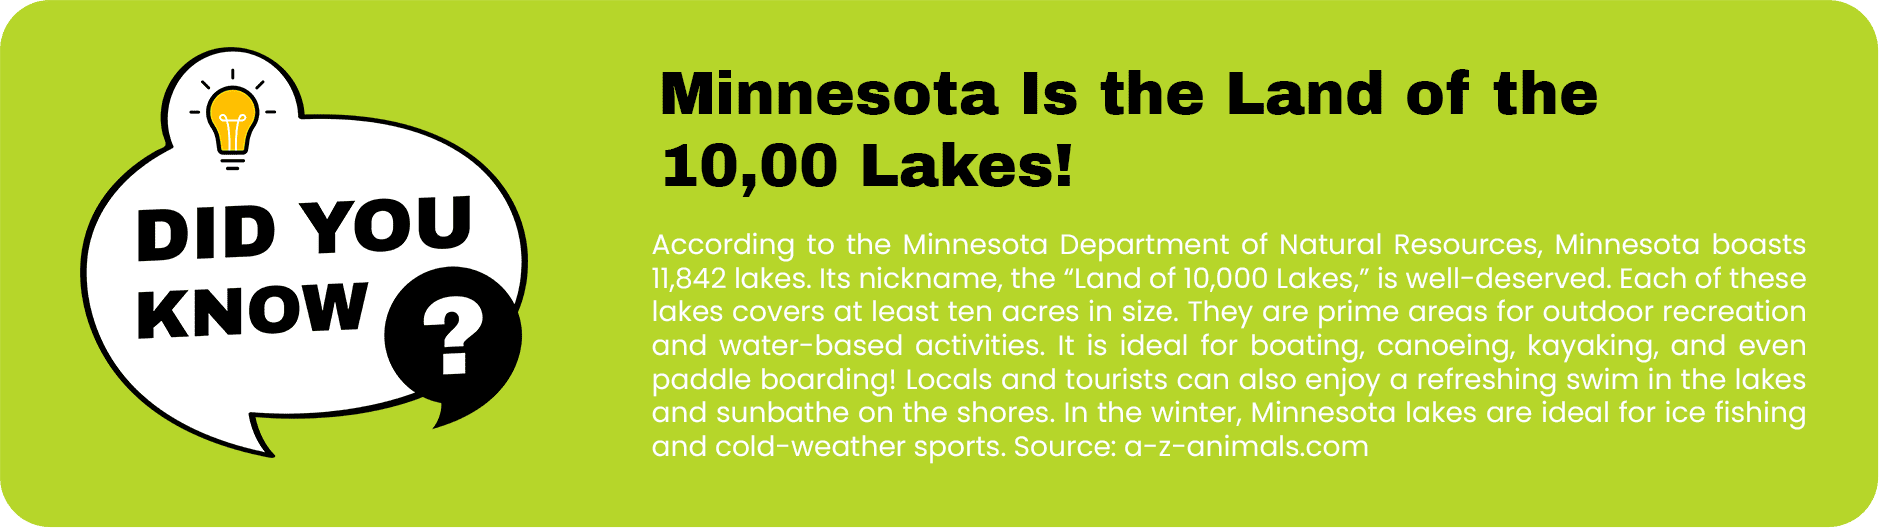 Informative graphic highlighting Minnesota as "the land of the 10,000 lakes" with preferred professional details about recreational activities and seasonal attractions.